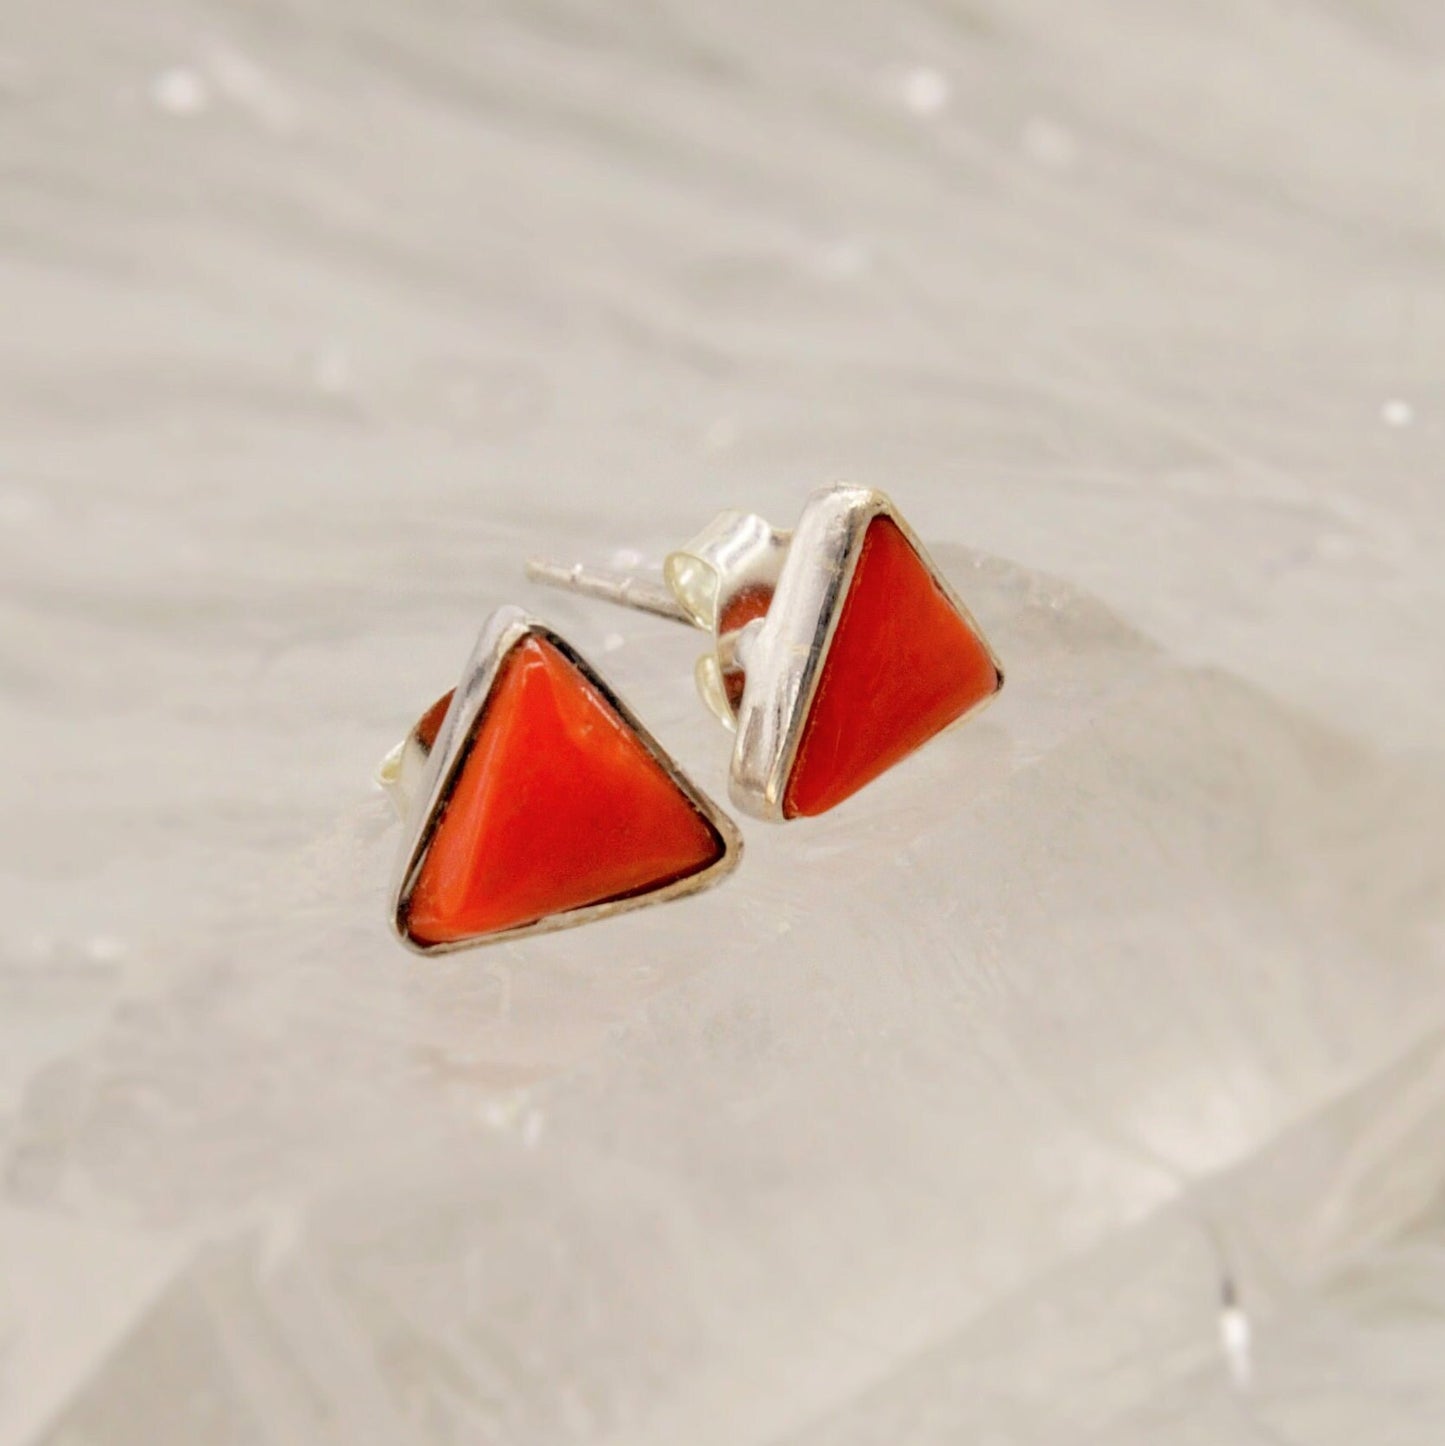 Red Coral Sterling Silver Stud Earrings, Dainty Triangle Earrings, Everyday Gemstone Earrings, Coral Jewelry, Birthday Gifts For Her